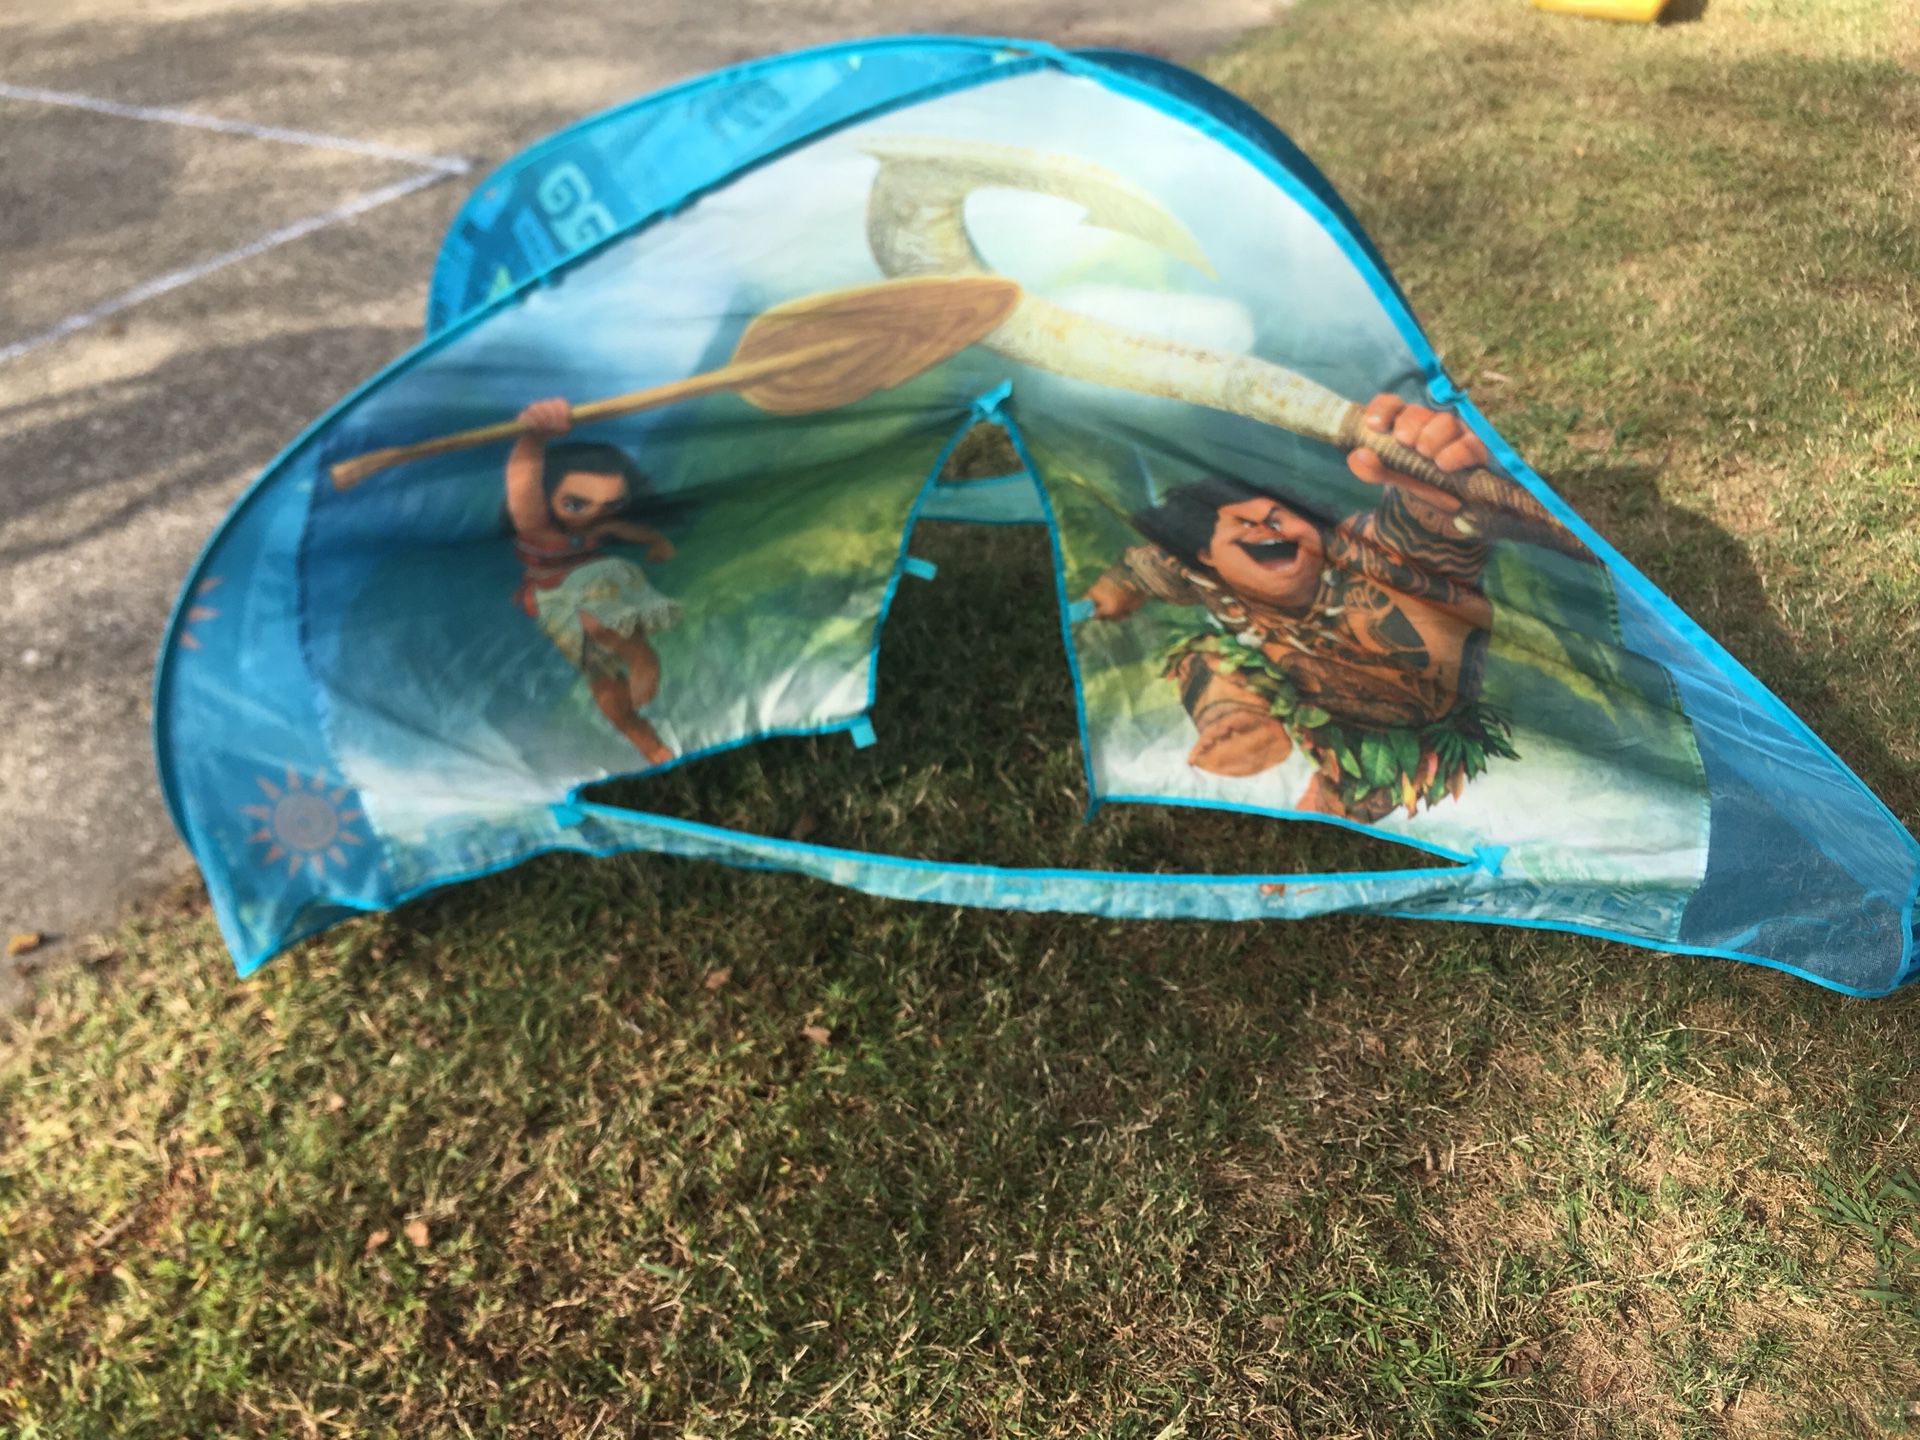 Moana twin bed tent